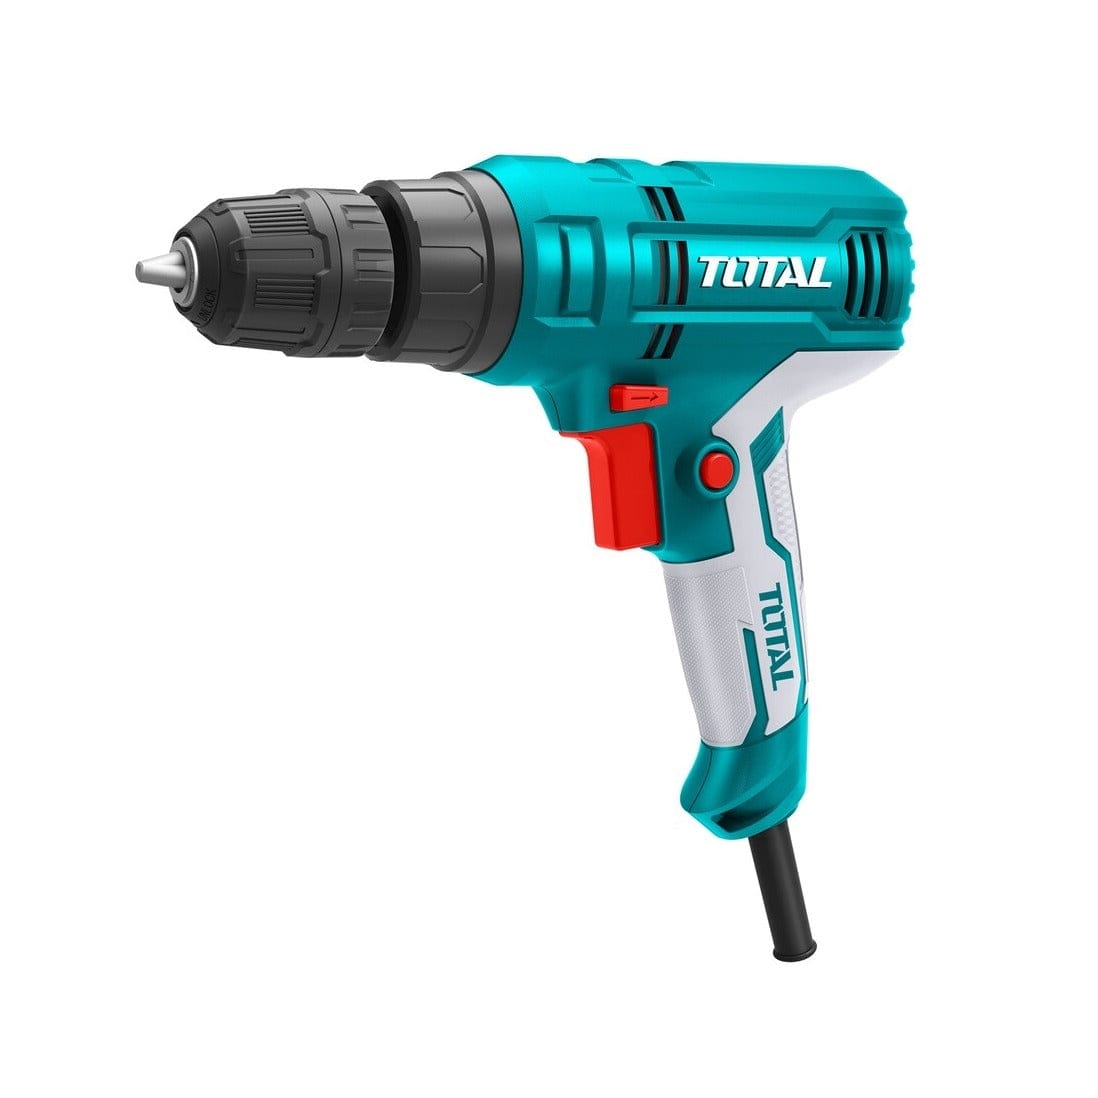 Total Electric Drill 280W - TD502106 | Supply Master Accra, Ghana Drill Buy Tools hardware Building materials